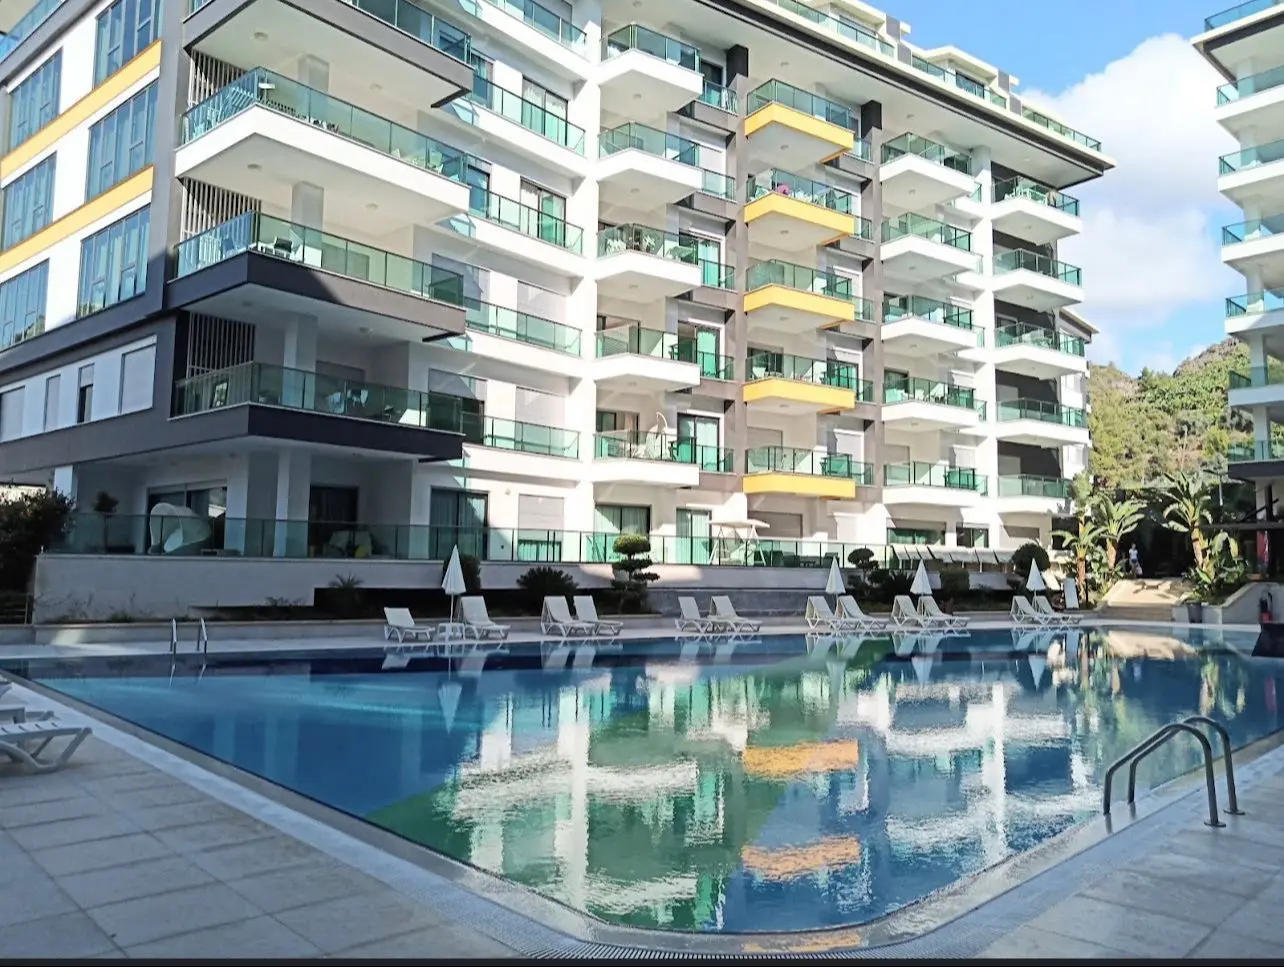 3+1 FLAT FOR SALE IN A LUXURY COMPLEX